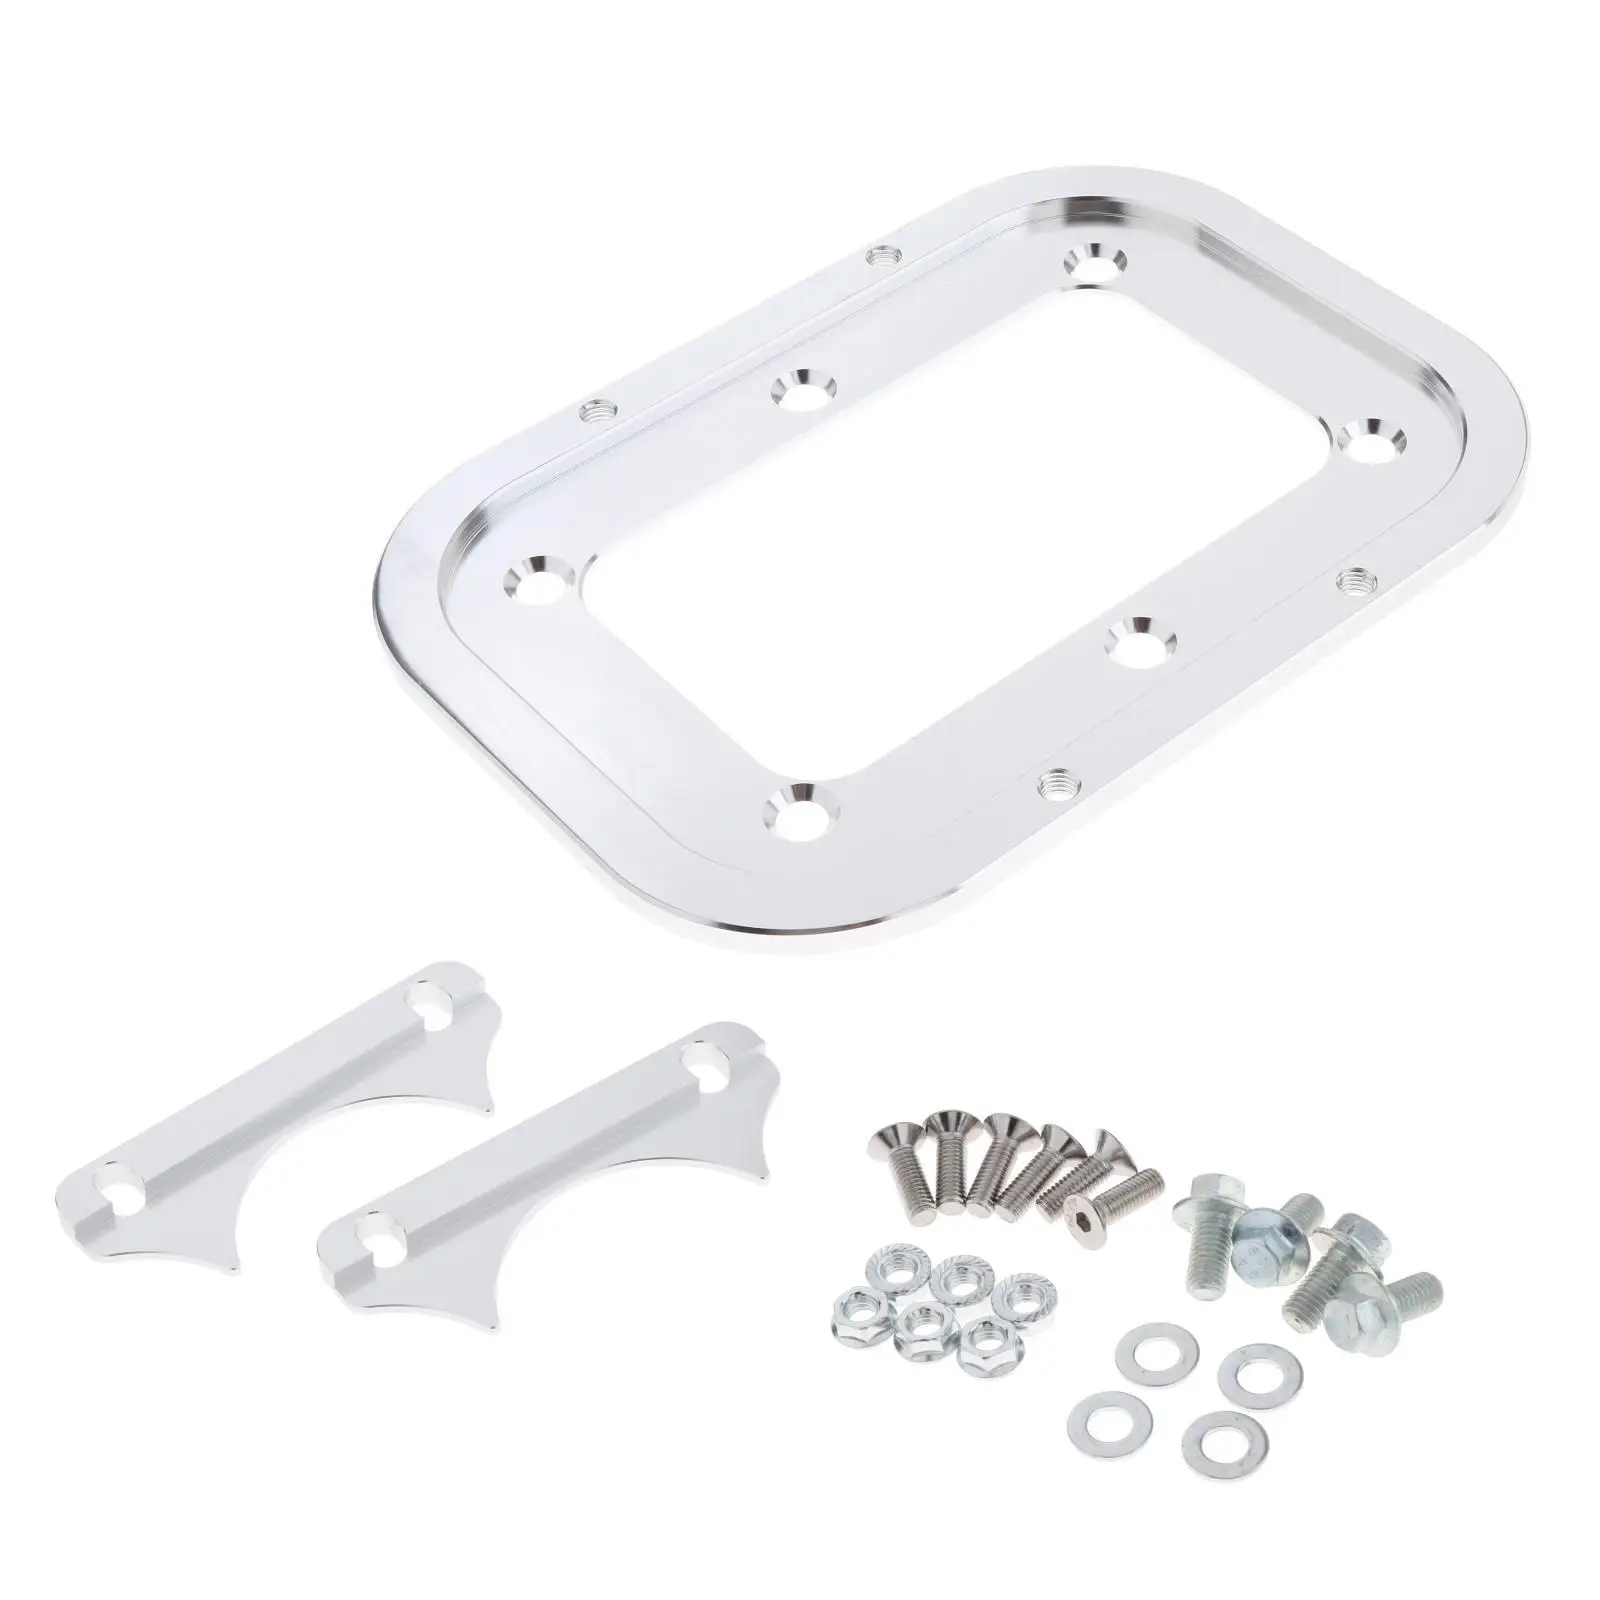 Billet Aluminum Battery Tray for Top 34M D34M Vehicle Spare Parts